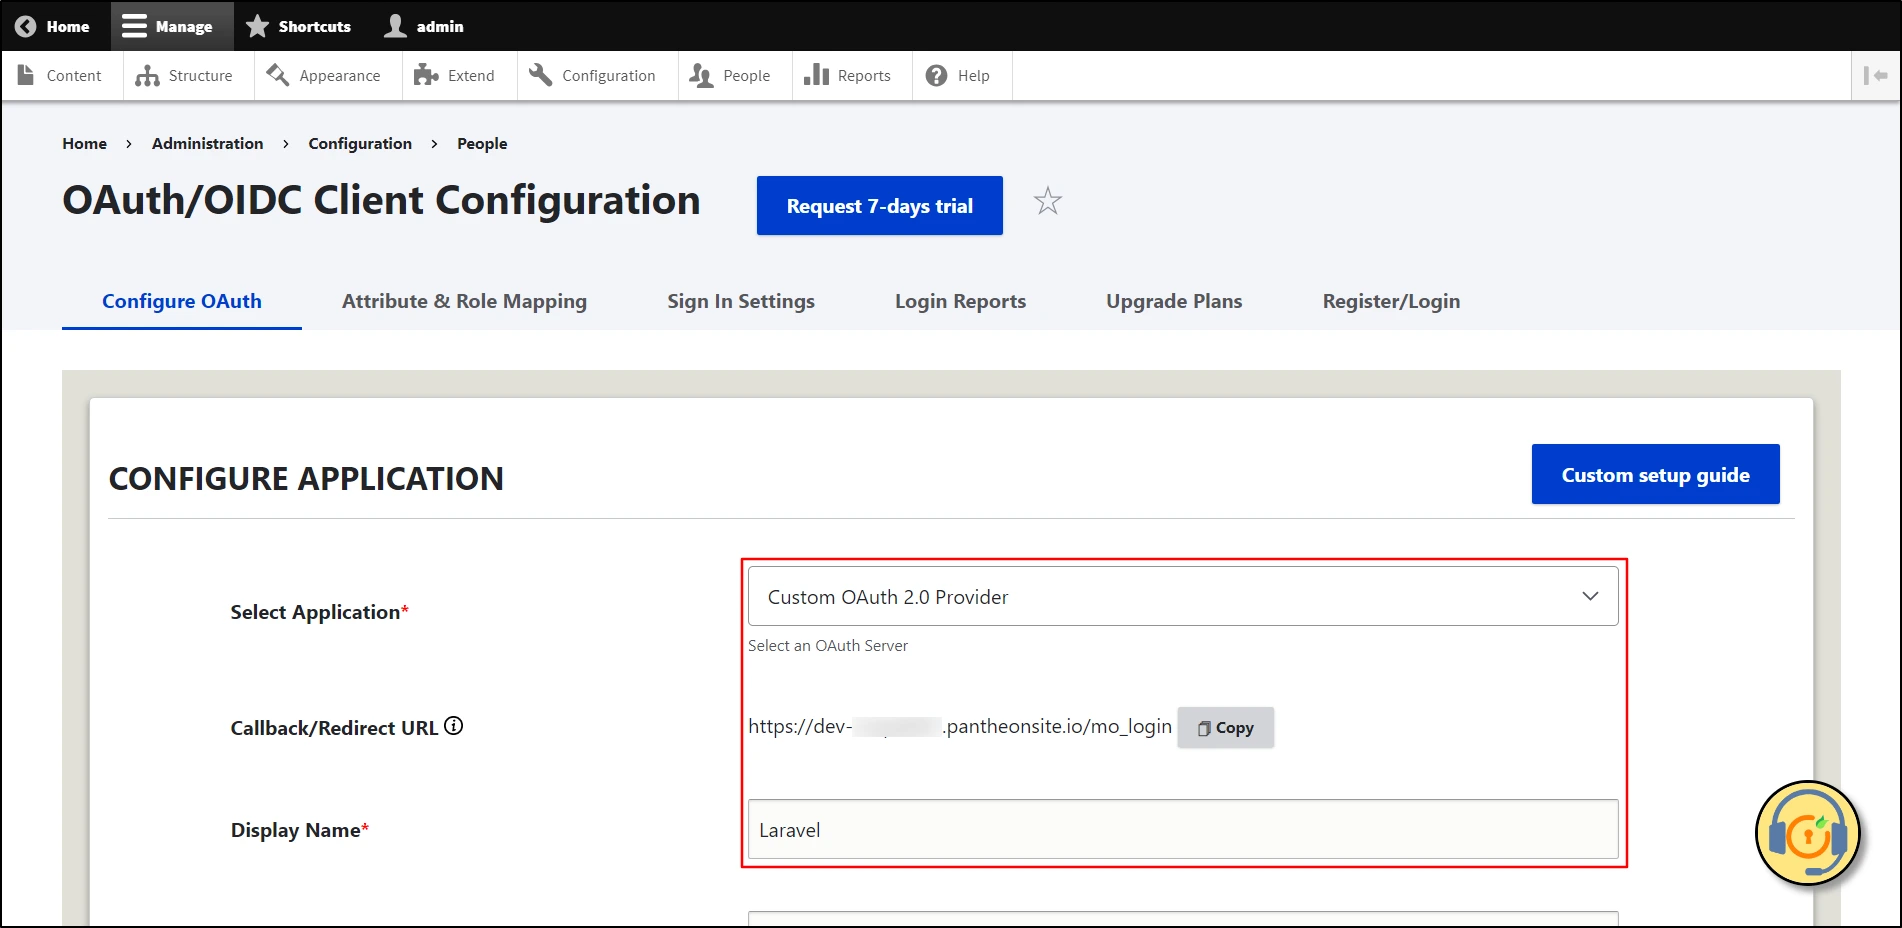 Drupal as OAuth/OpenID Connect Single Sign-On - Under Configure OAuth - Select Custom OAuth 2.0 Provider from Select Application - Copy Callback